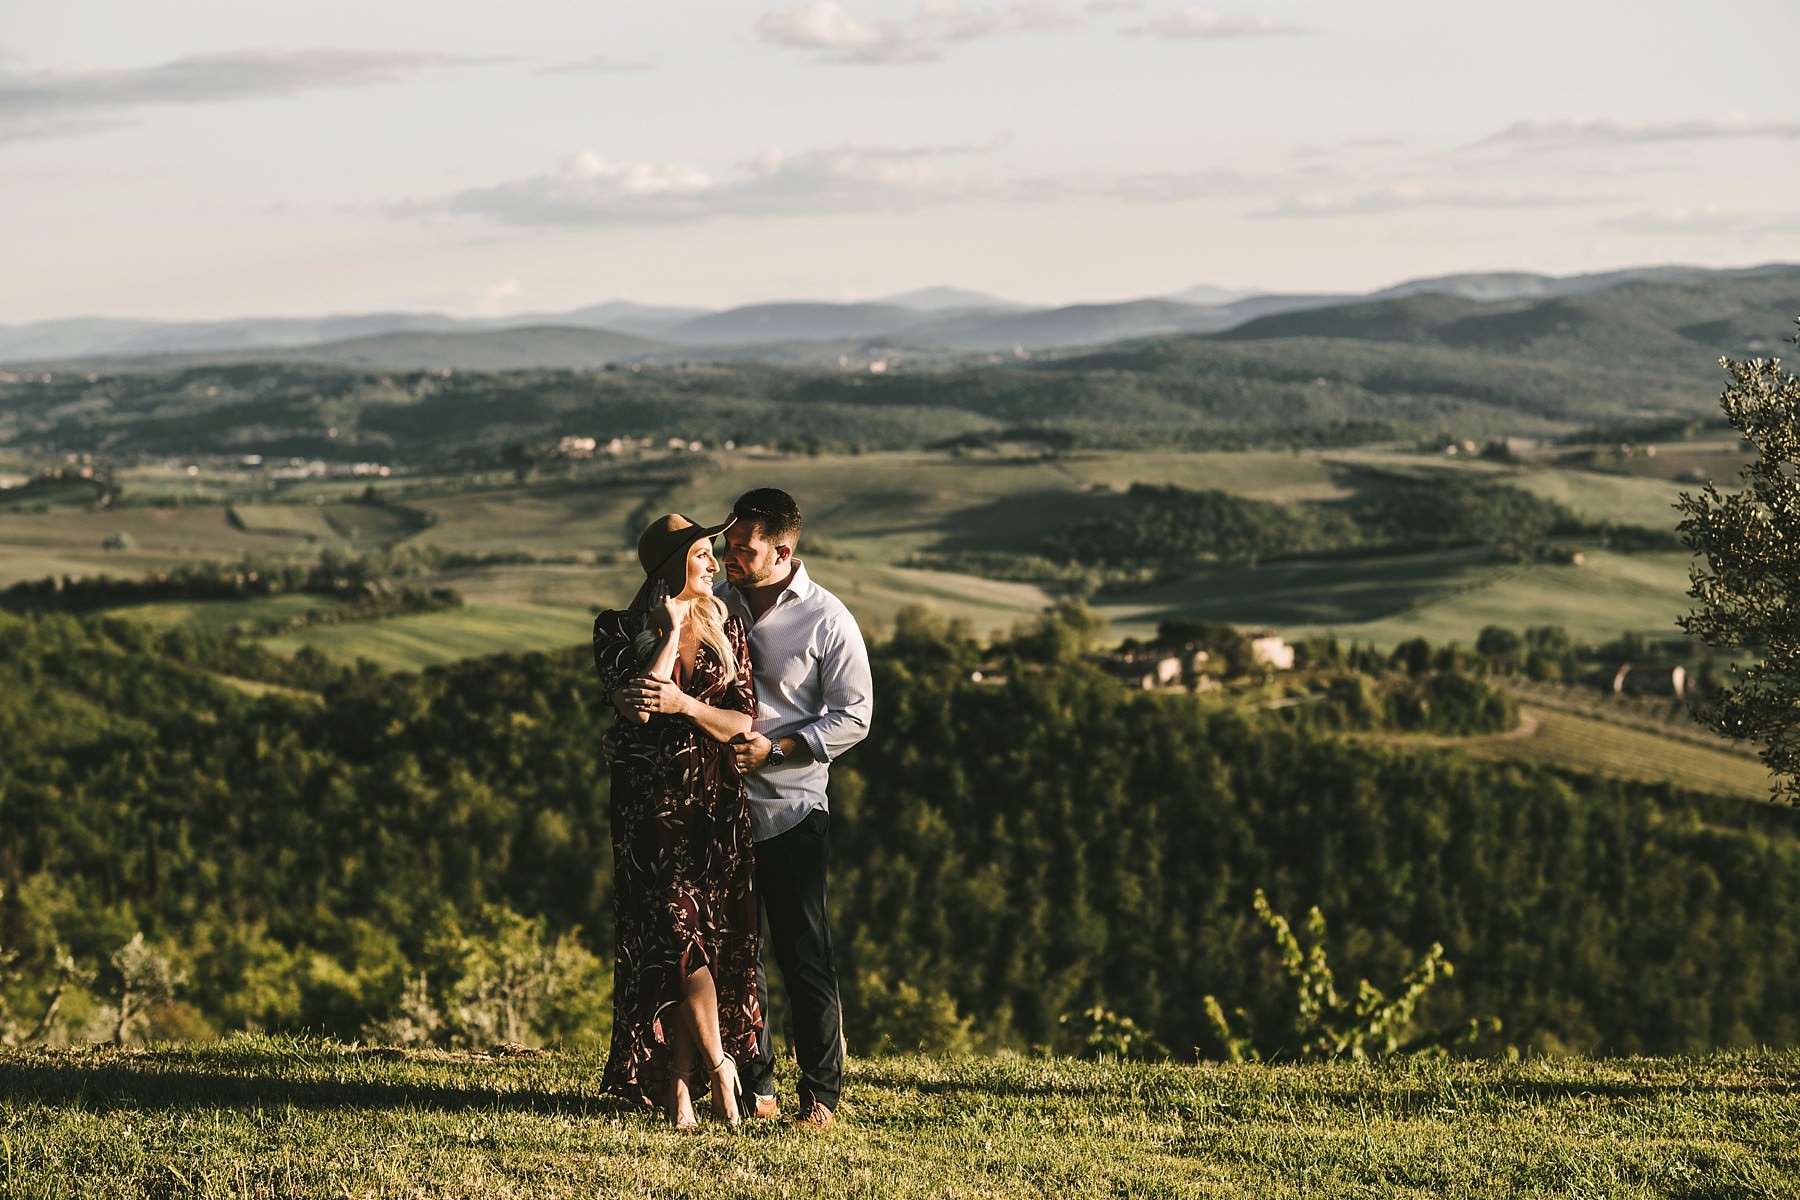 Tuscany countryside of amazing venue Castello La Leccia is the dreamiest location where this couple take their unforgettable honeymoon photo shoot